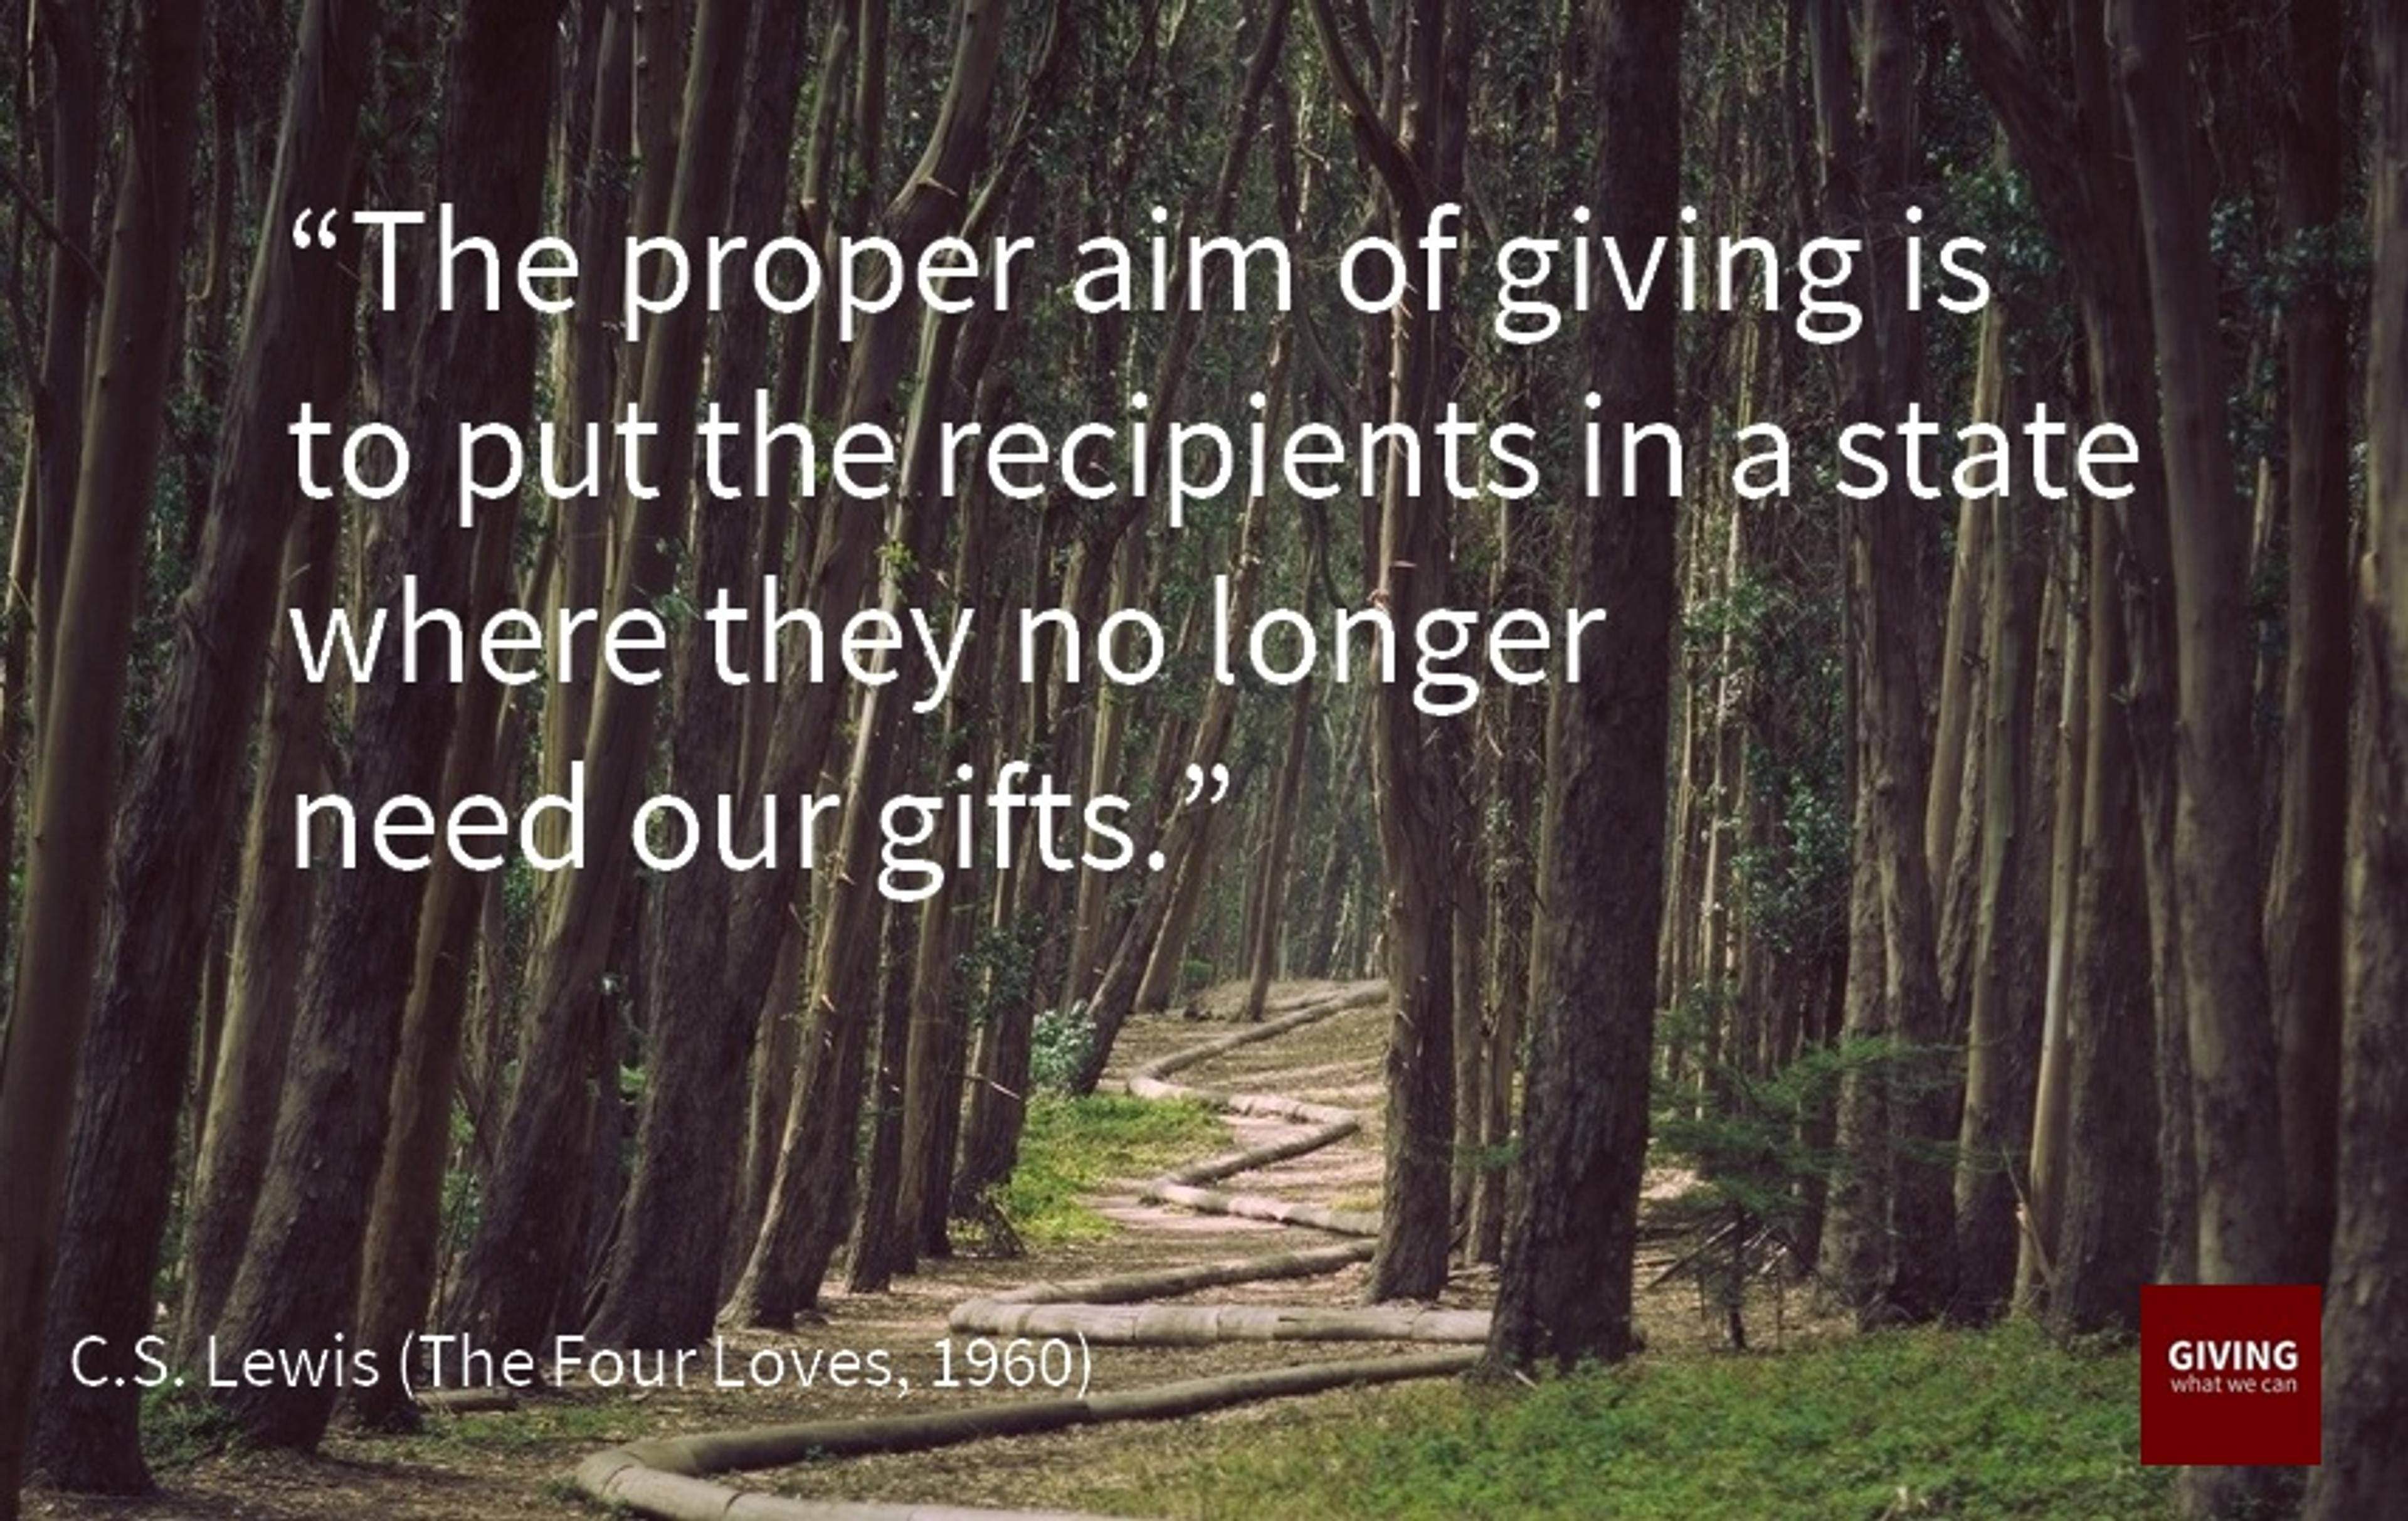 The proper aim of giving is to put the recipients in a state where they no longer need our gifts